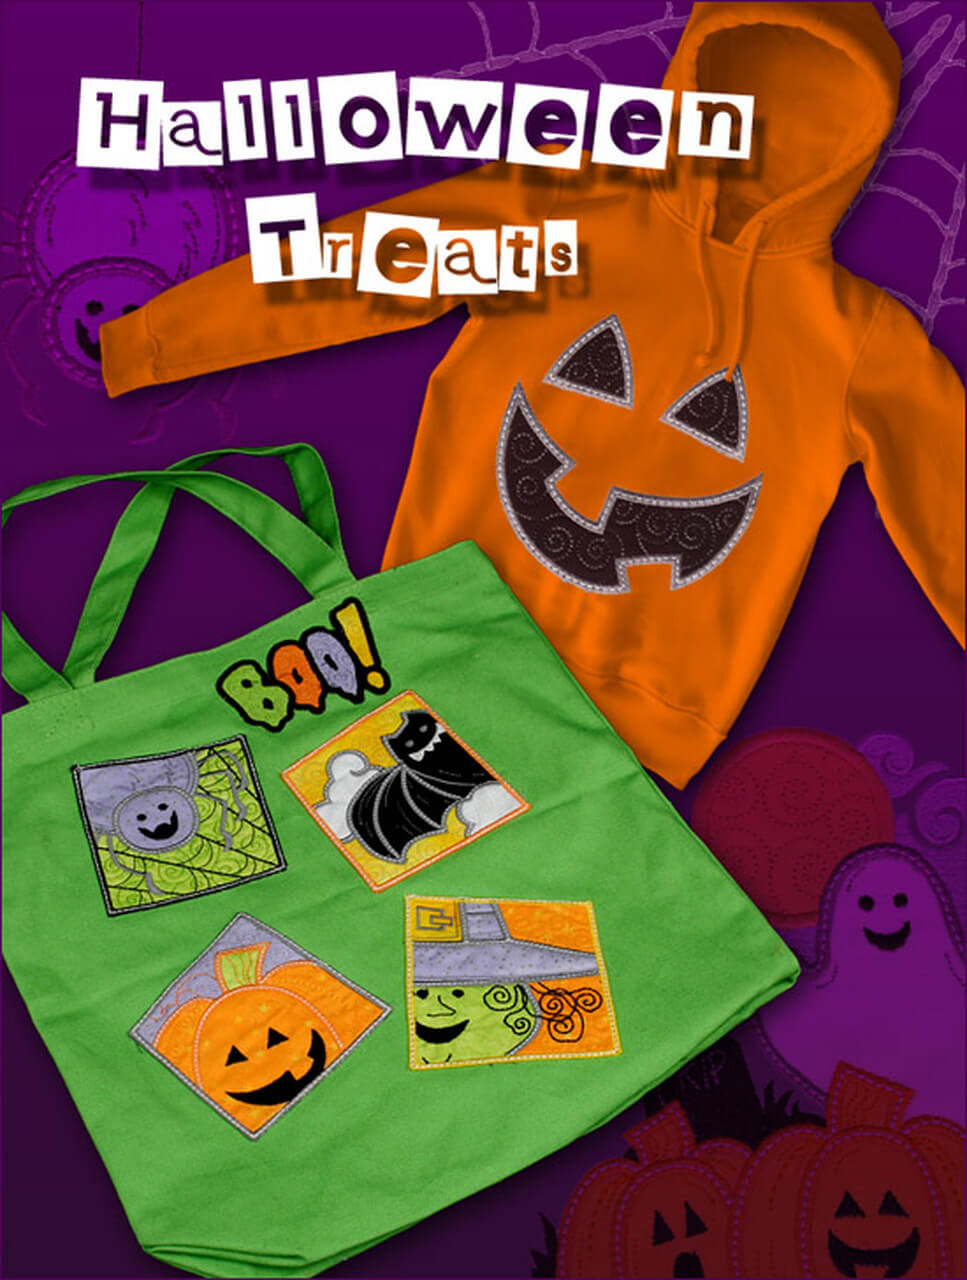 Halloween Treats Embroidery Design Collection OESD 12357 available at Nancy Zieman Productions at ShopNZP.com 01